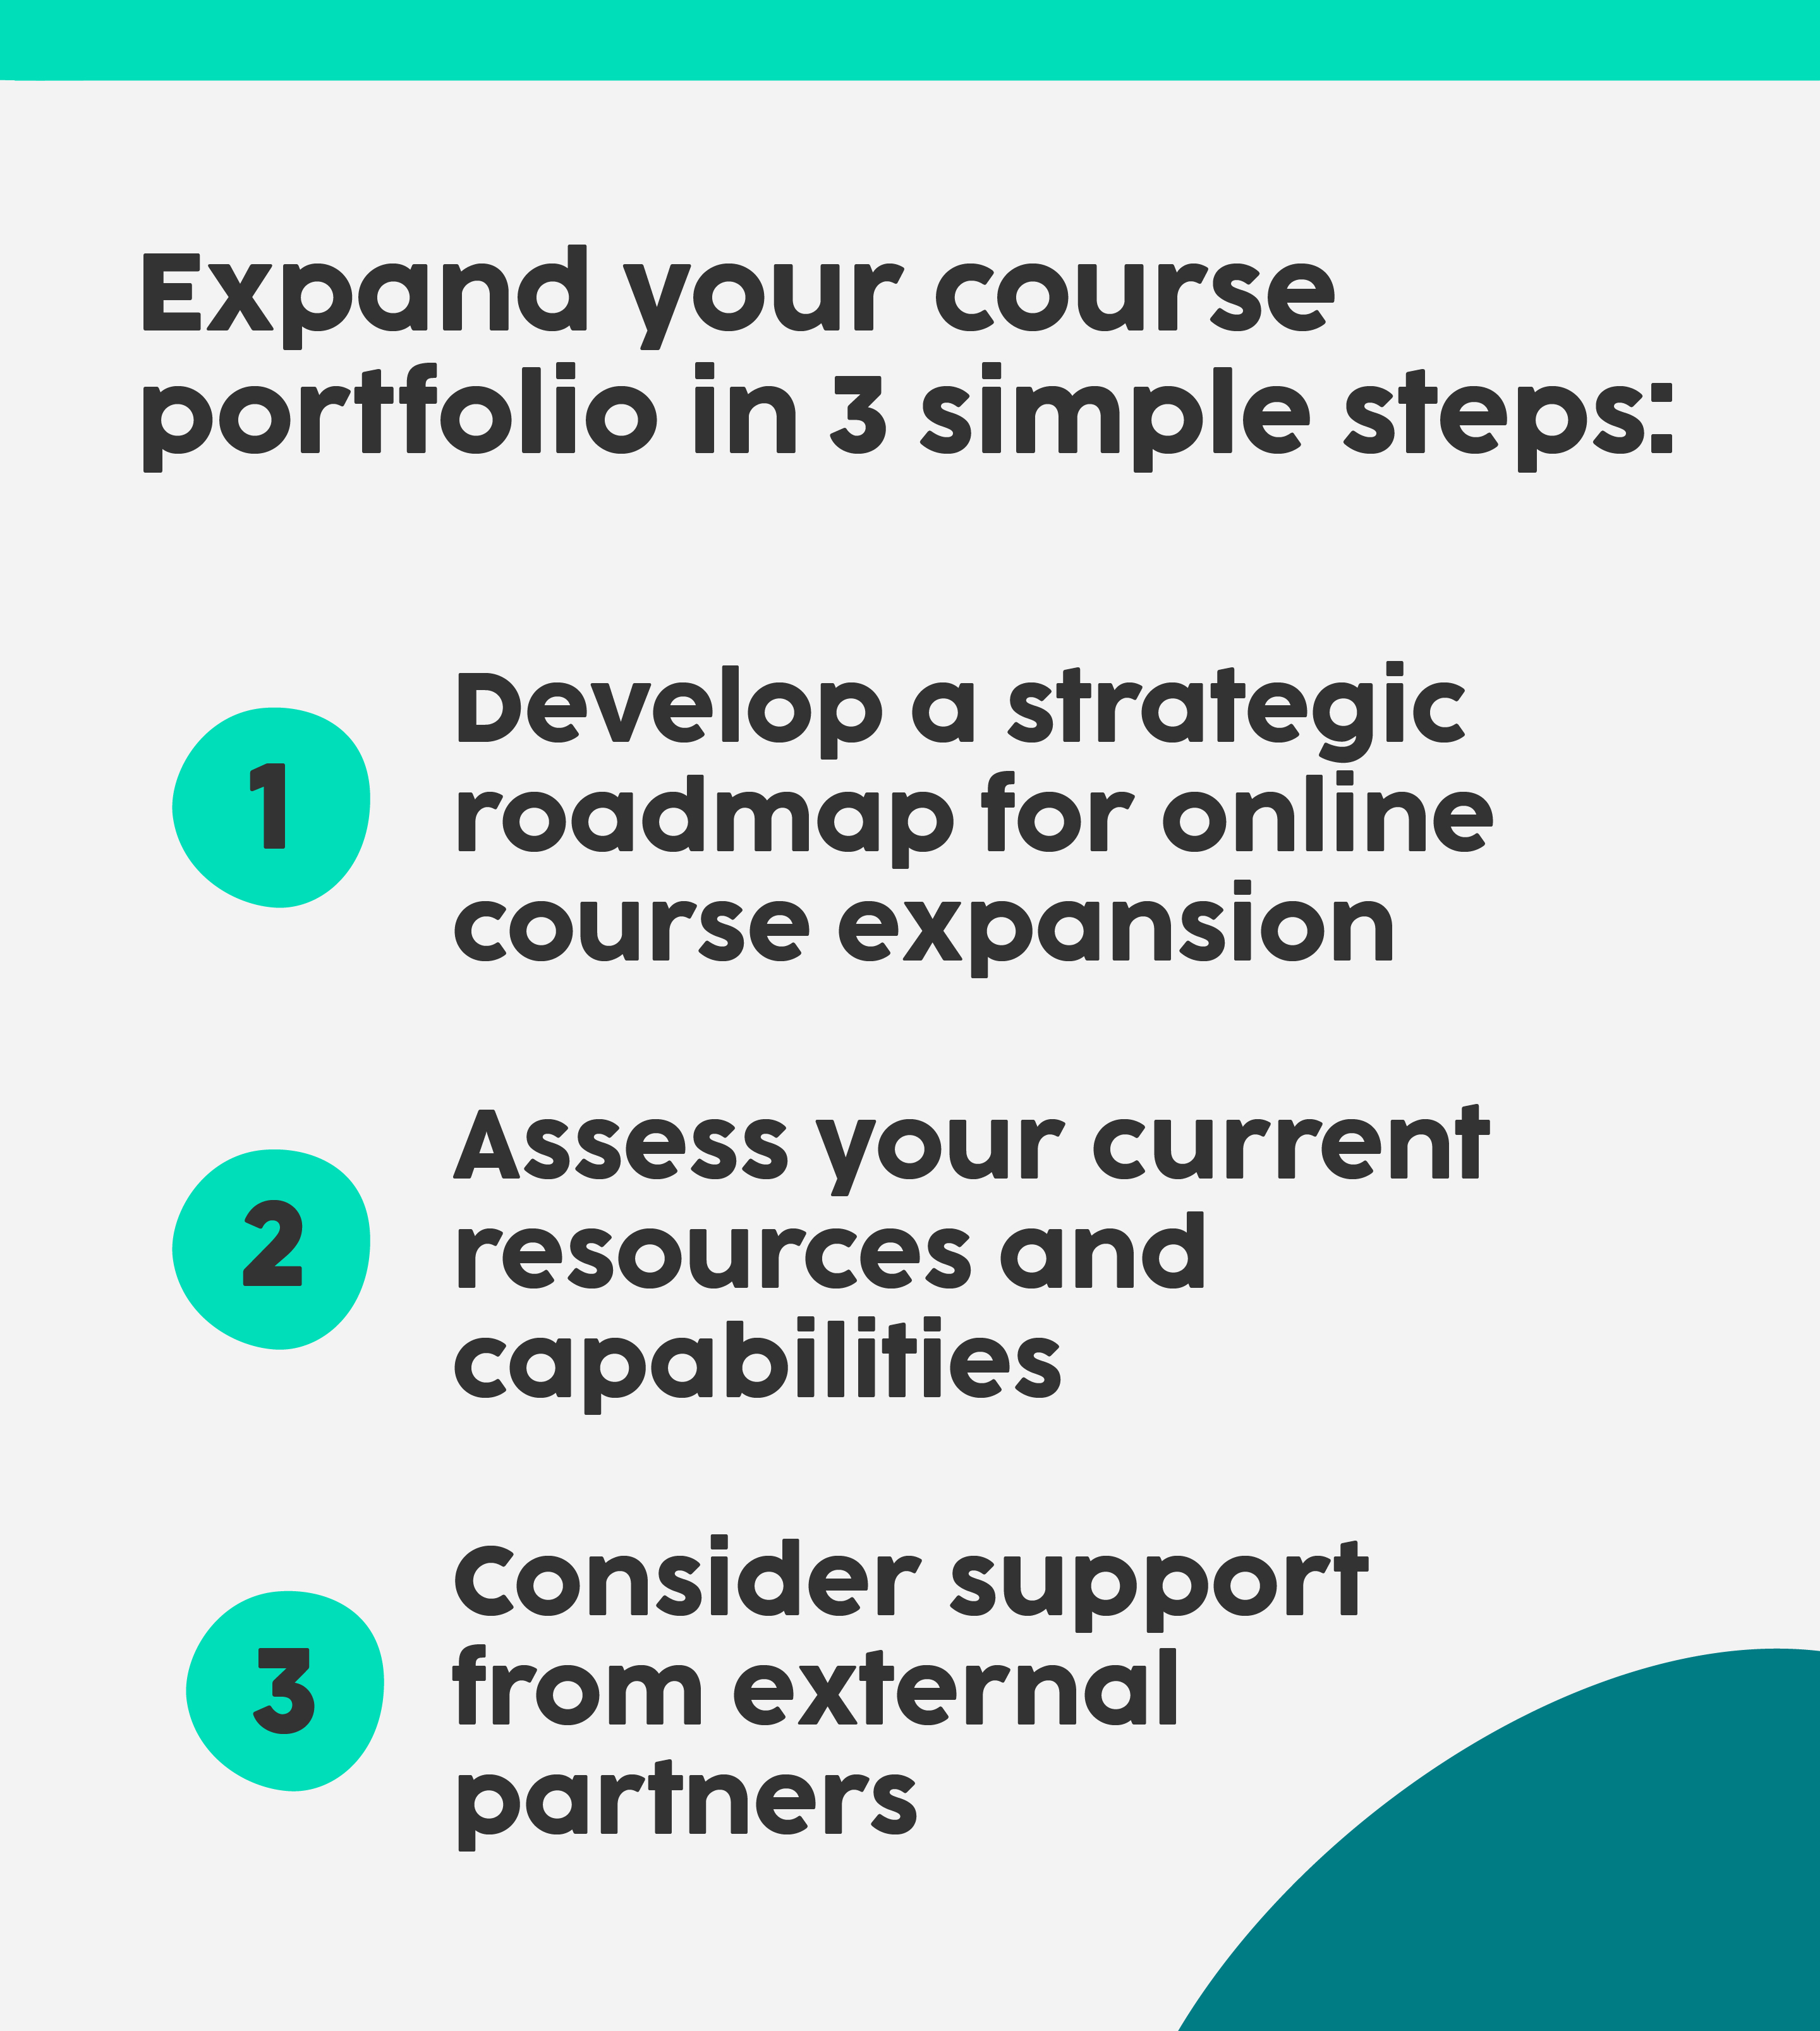 Expand your course portfolio in 3 simple steps:  1. Develop a strategic roadmap for online course expansion 2. Assess your current resources and capabilities 3. Consider support from external partners